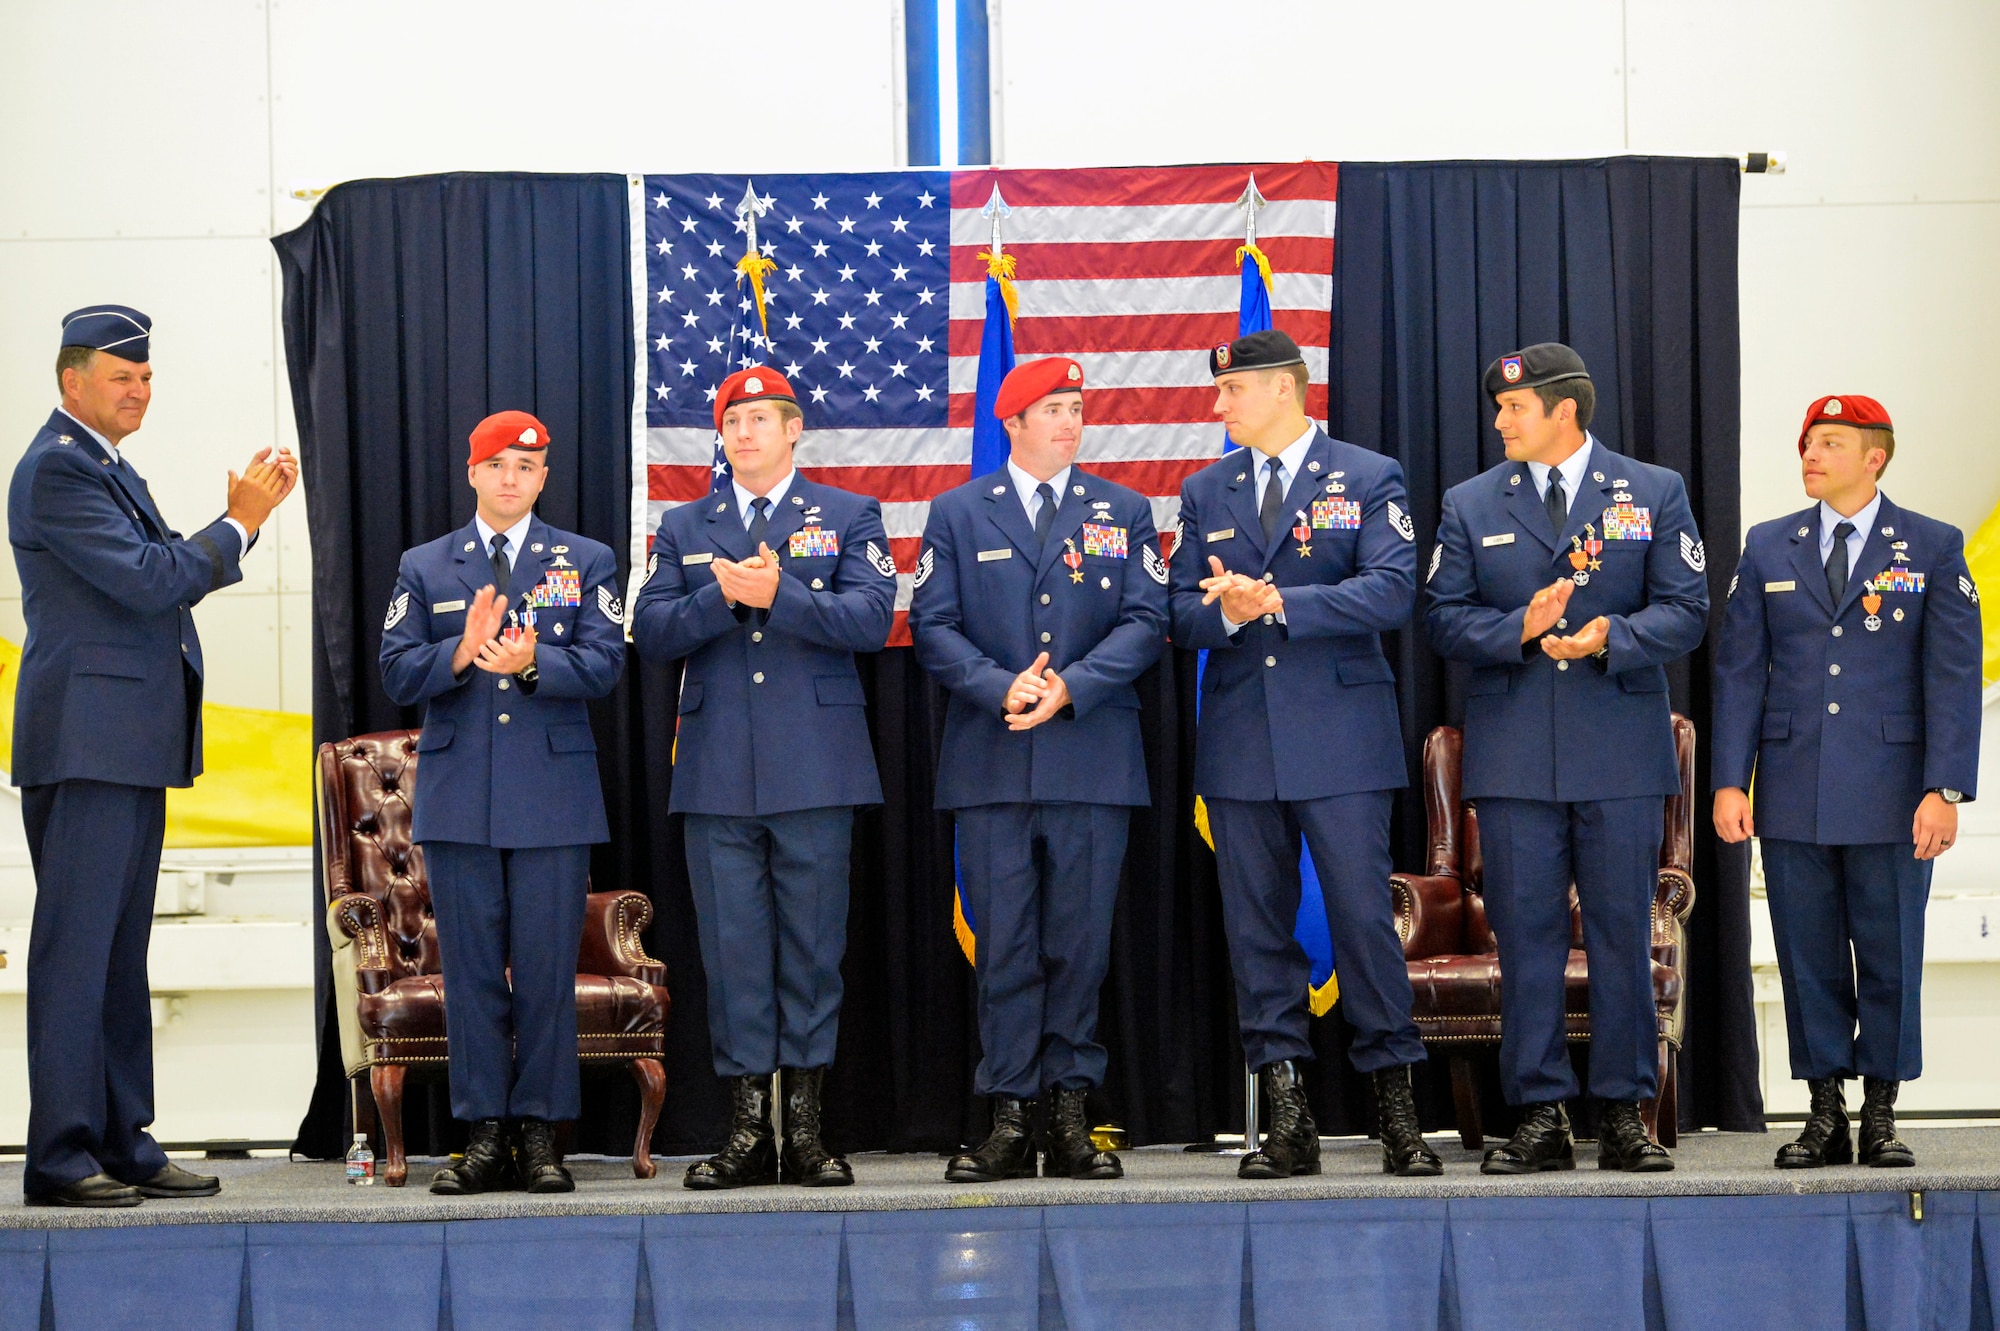 Lt. Gen. Bradley Heithold (left), Air Force Special Operations Command commander applauds six Airmen from the 22nd Special Tactics Squadron Aug. 18, 2014, after awarding them with medals for valor during the 22nd STS awards ceremony at Joint Base Lewis-McChord, Wash.  Heithold pinned eight medals on to the Airmen which included a Silver Star, a Bronze Star with Valor and four Bronze Stars. (U.S. Air Force photo/Staff Sgt. Russ Jackson)